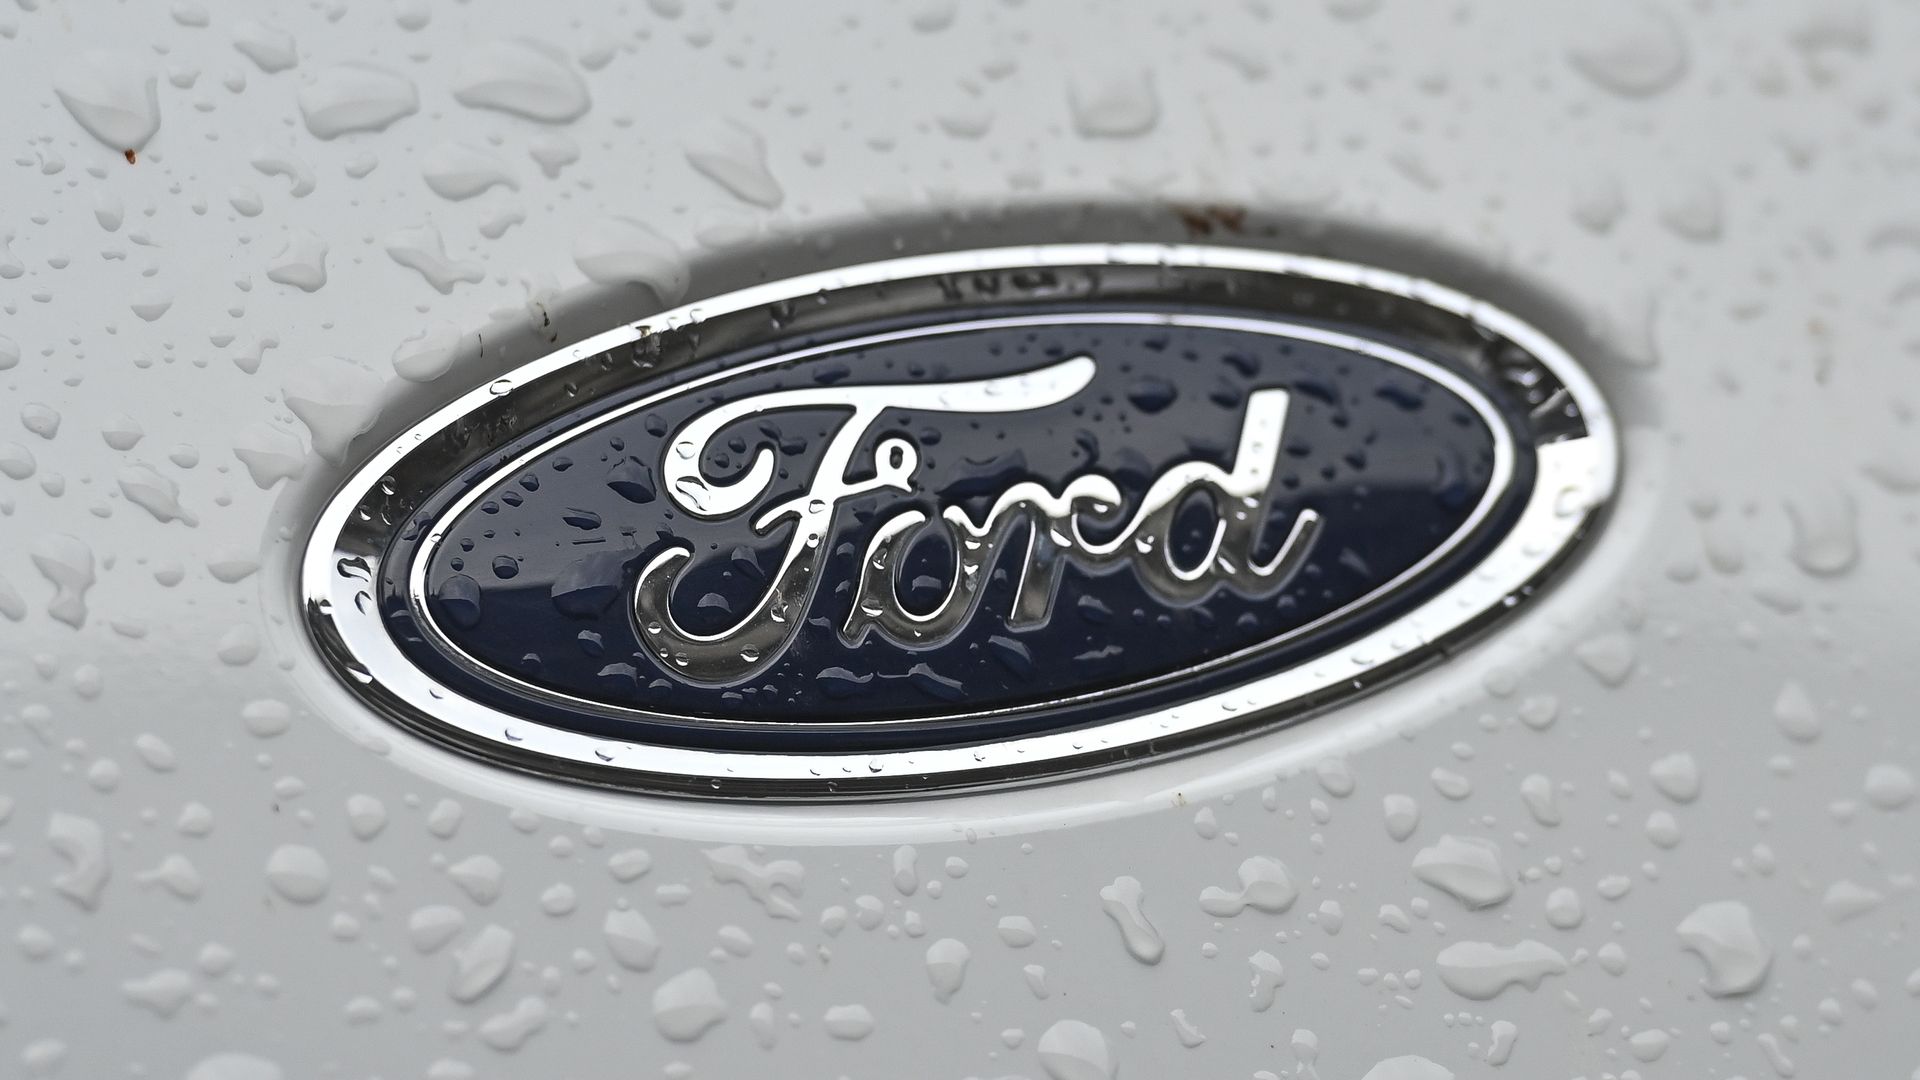 Rain drops on the blue-oval logo of Ford